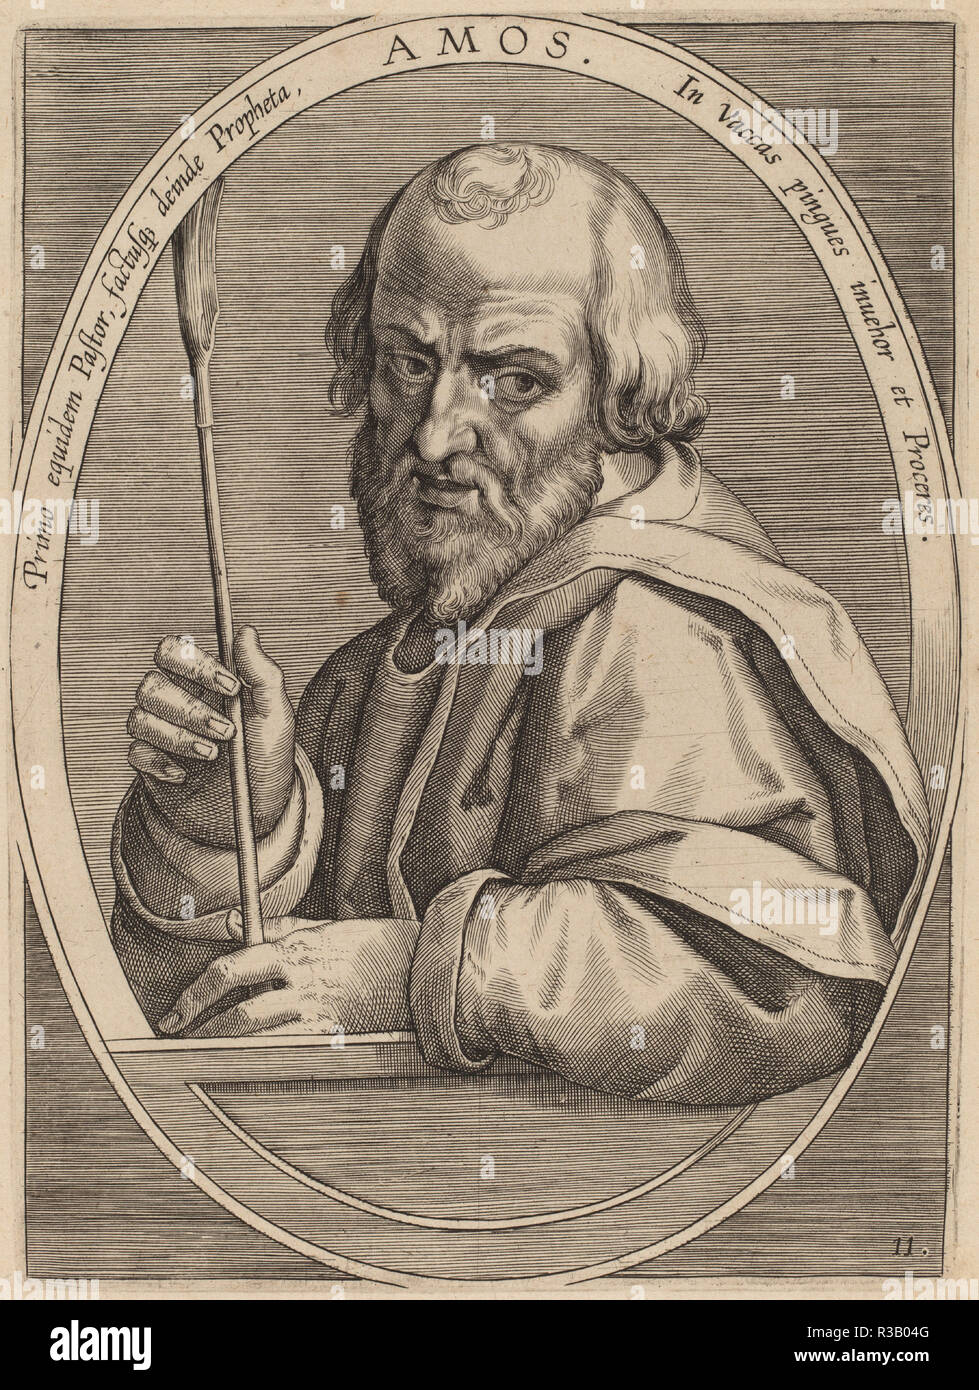 Amos. Dated: published 1613. Dimensions: plate: 17.3 x 12.7 cm (6 13/16 x 5 in.)  sheet: 24.3 x 19 cm (9 9/16 x 7 1/2 in.). Medium: engraving on laid paper. Museum: National Gallery of Art, Washington DC. Author: Theodor Galle after Jan van der Straet. Stock Photo